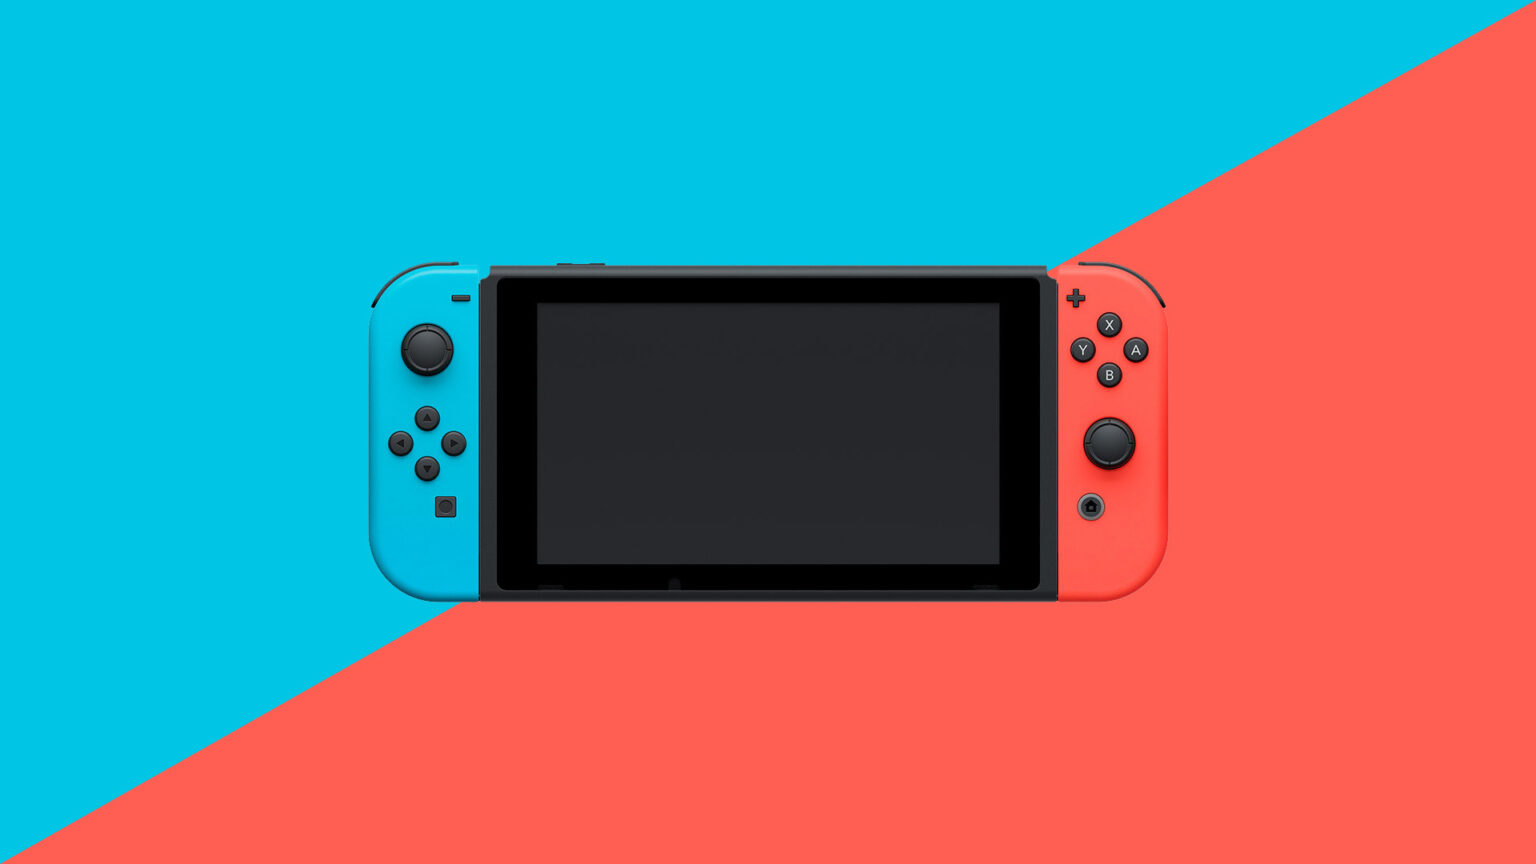 Switch Pro could be announced